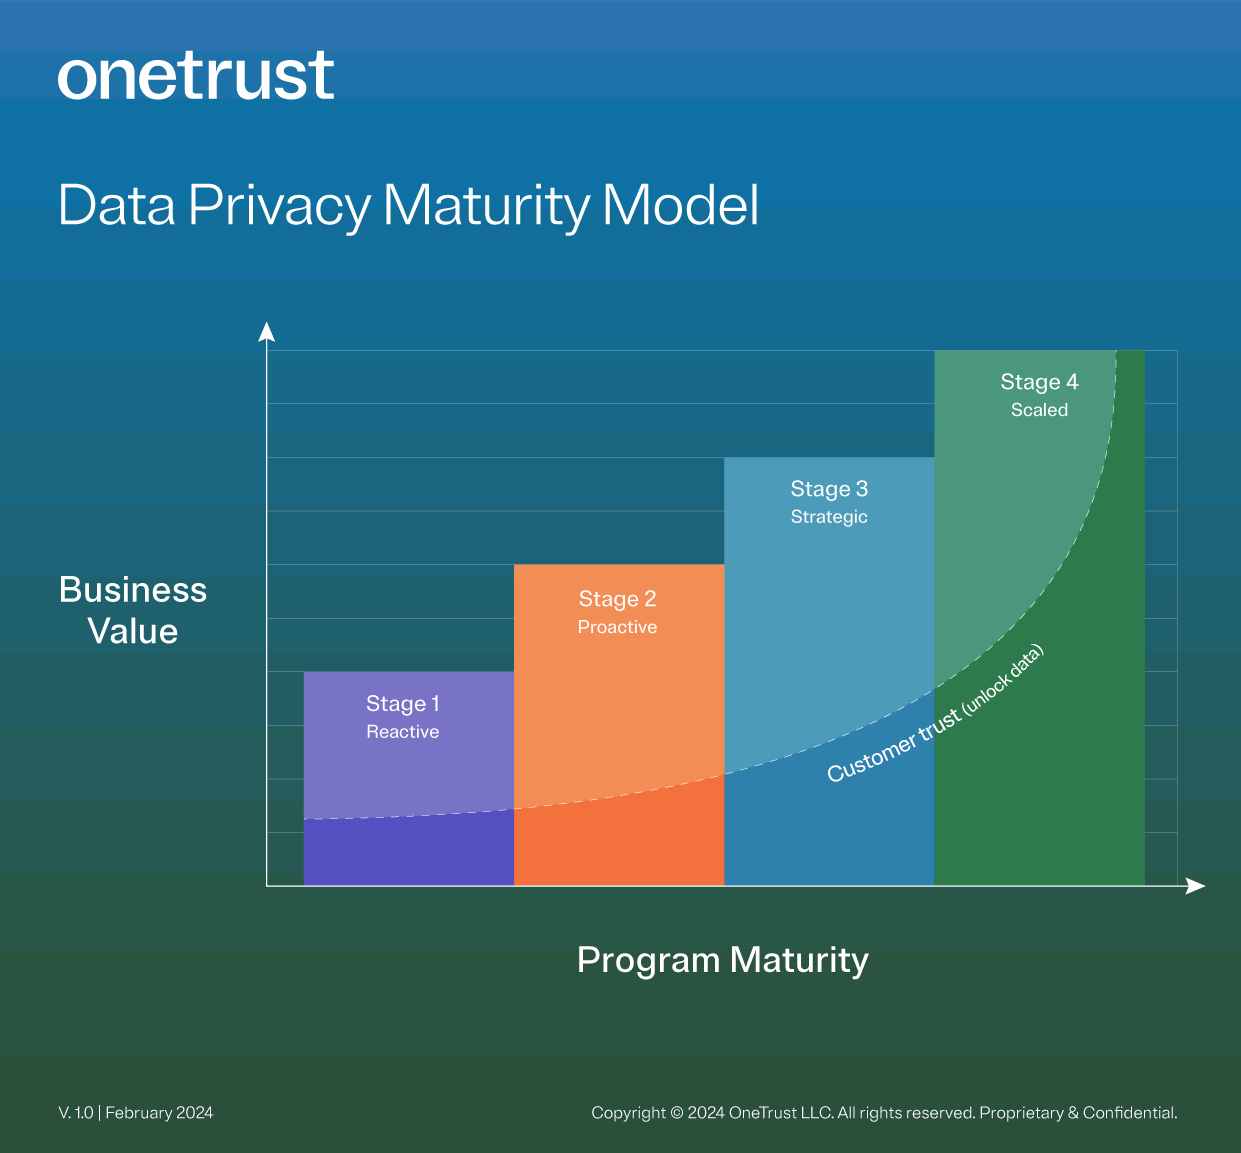 Bar graph showing how the customer trust curve rises sharply in the final stages of the data privacy maturity model.